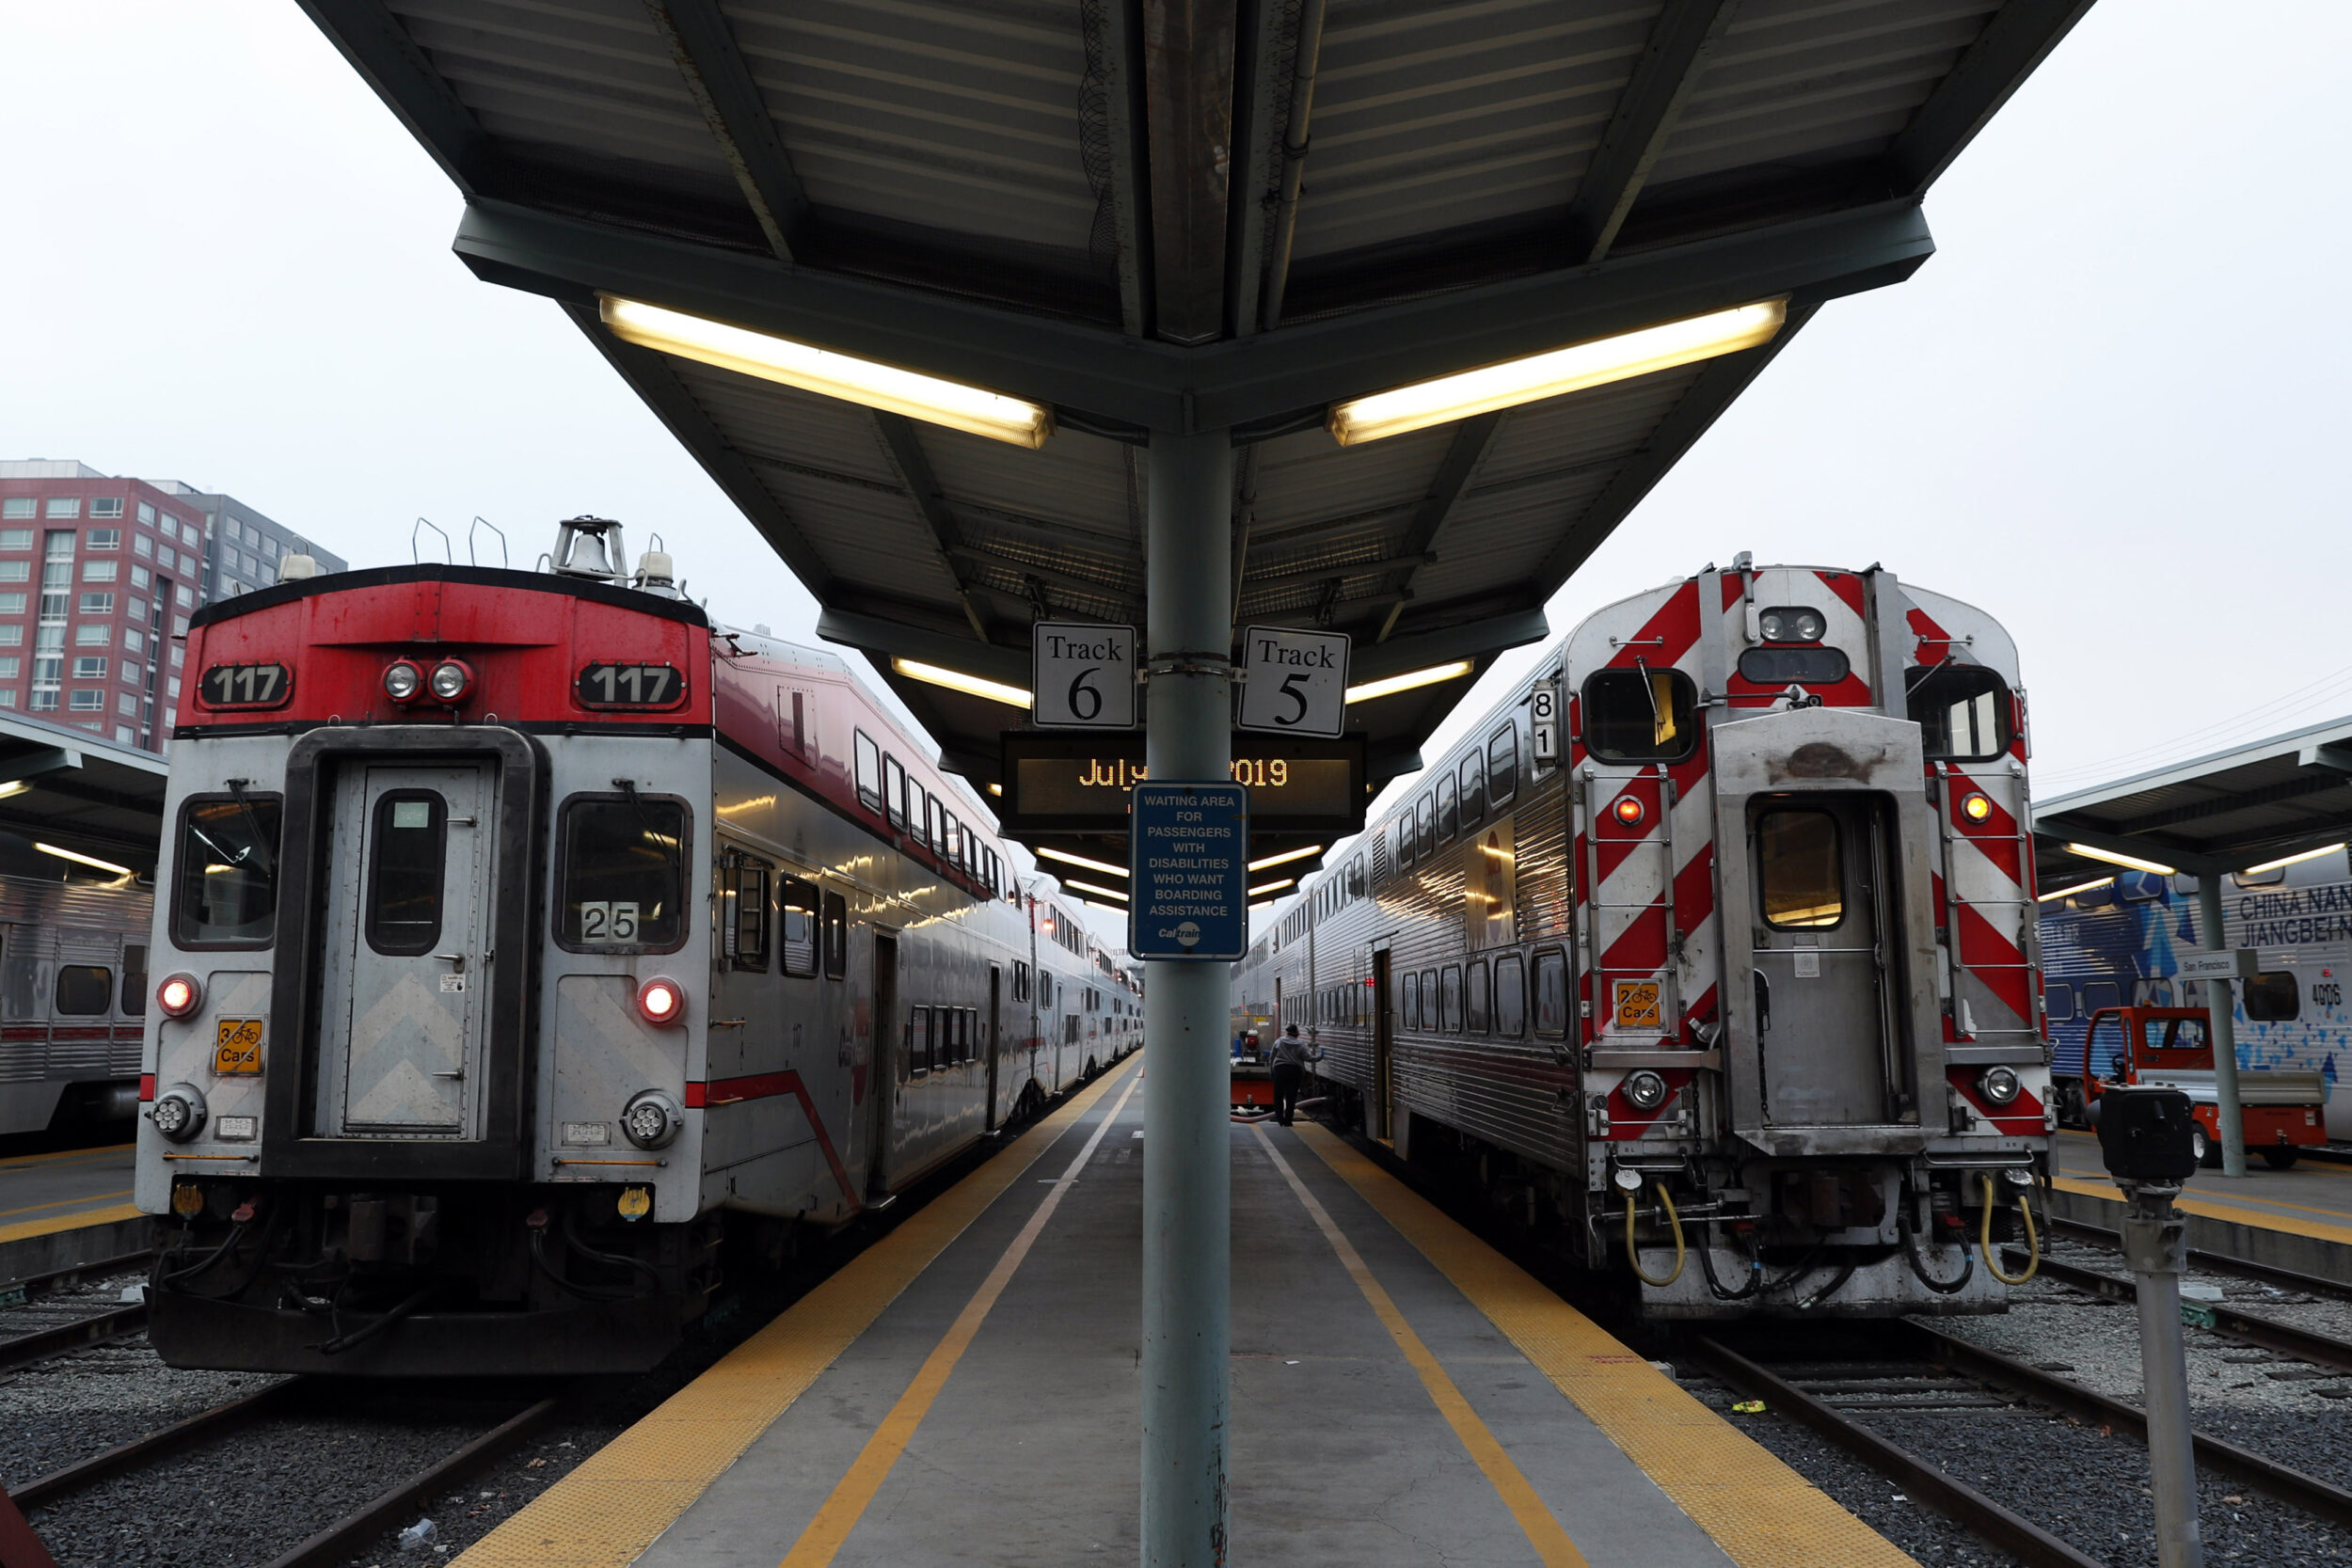 Trains wait on tracks 5 and 6 for passengers at the Caltrain Station in San Francisco, Calif., on Thursday, July 18, 2019. Business leaders and transportation officials are putting together a sales tax ballot measure for next year that would generate billions for transportation infrastructure in the Bay Area. Top on their wish list is the downtown extension of Caltrain, with a tunnel running from the Mission Bay Area to the Transbay Terminal.